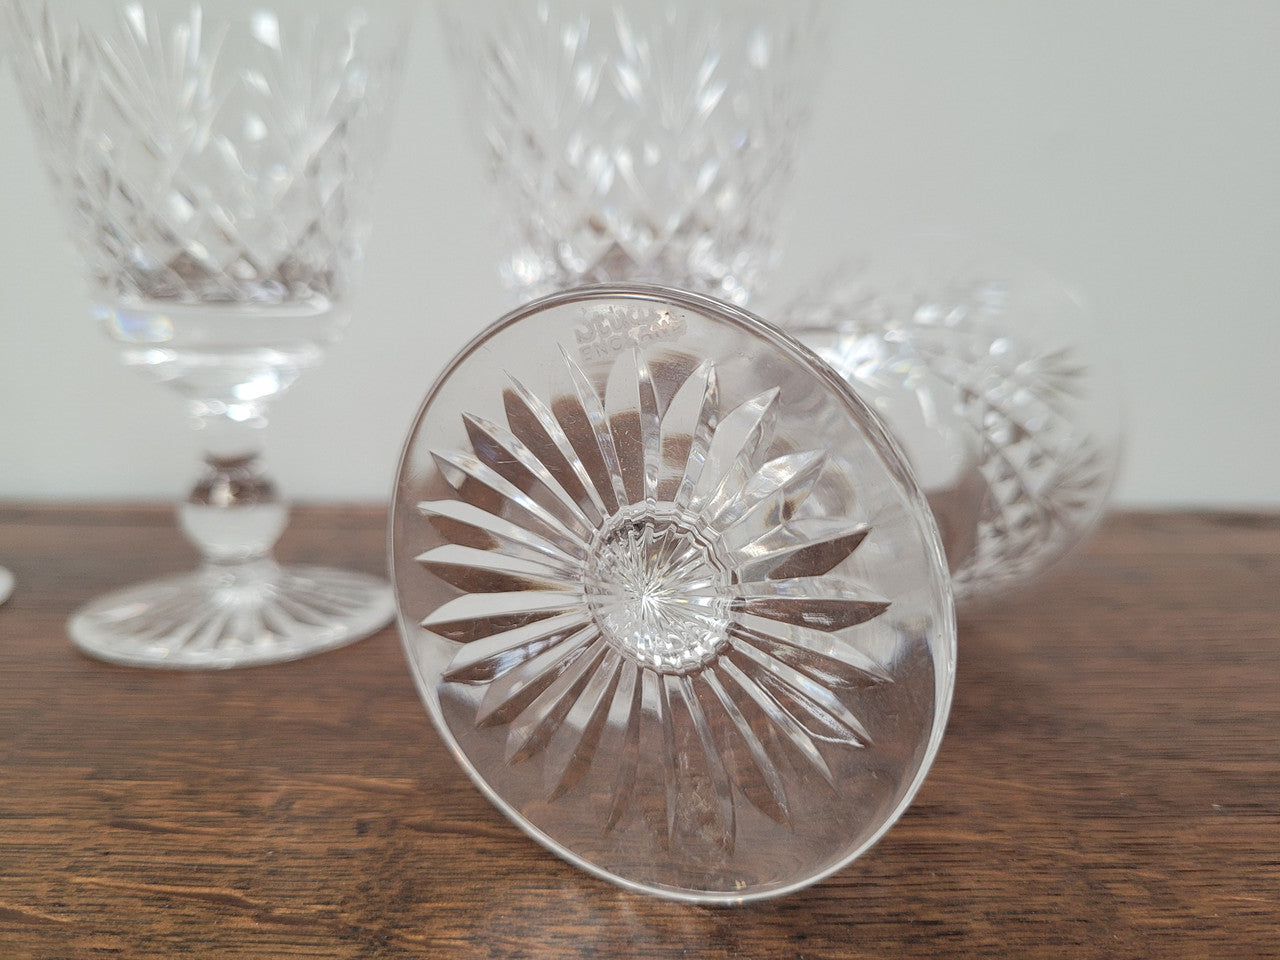 Set of six Stuart crystal “Henley” pattern wine glasses. In good original condition with no chips or cracks.